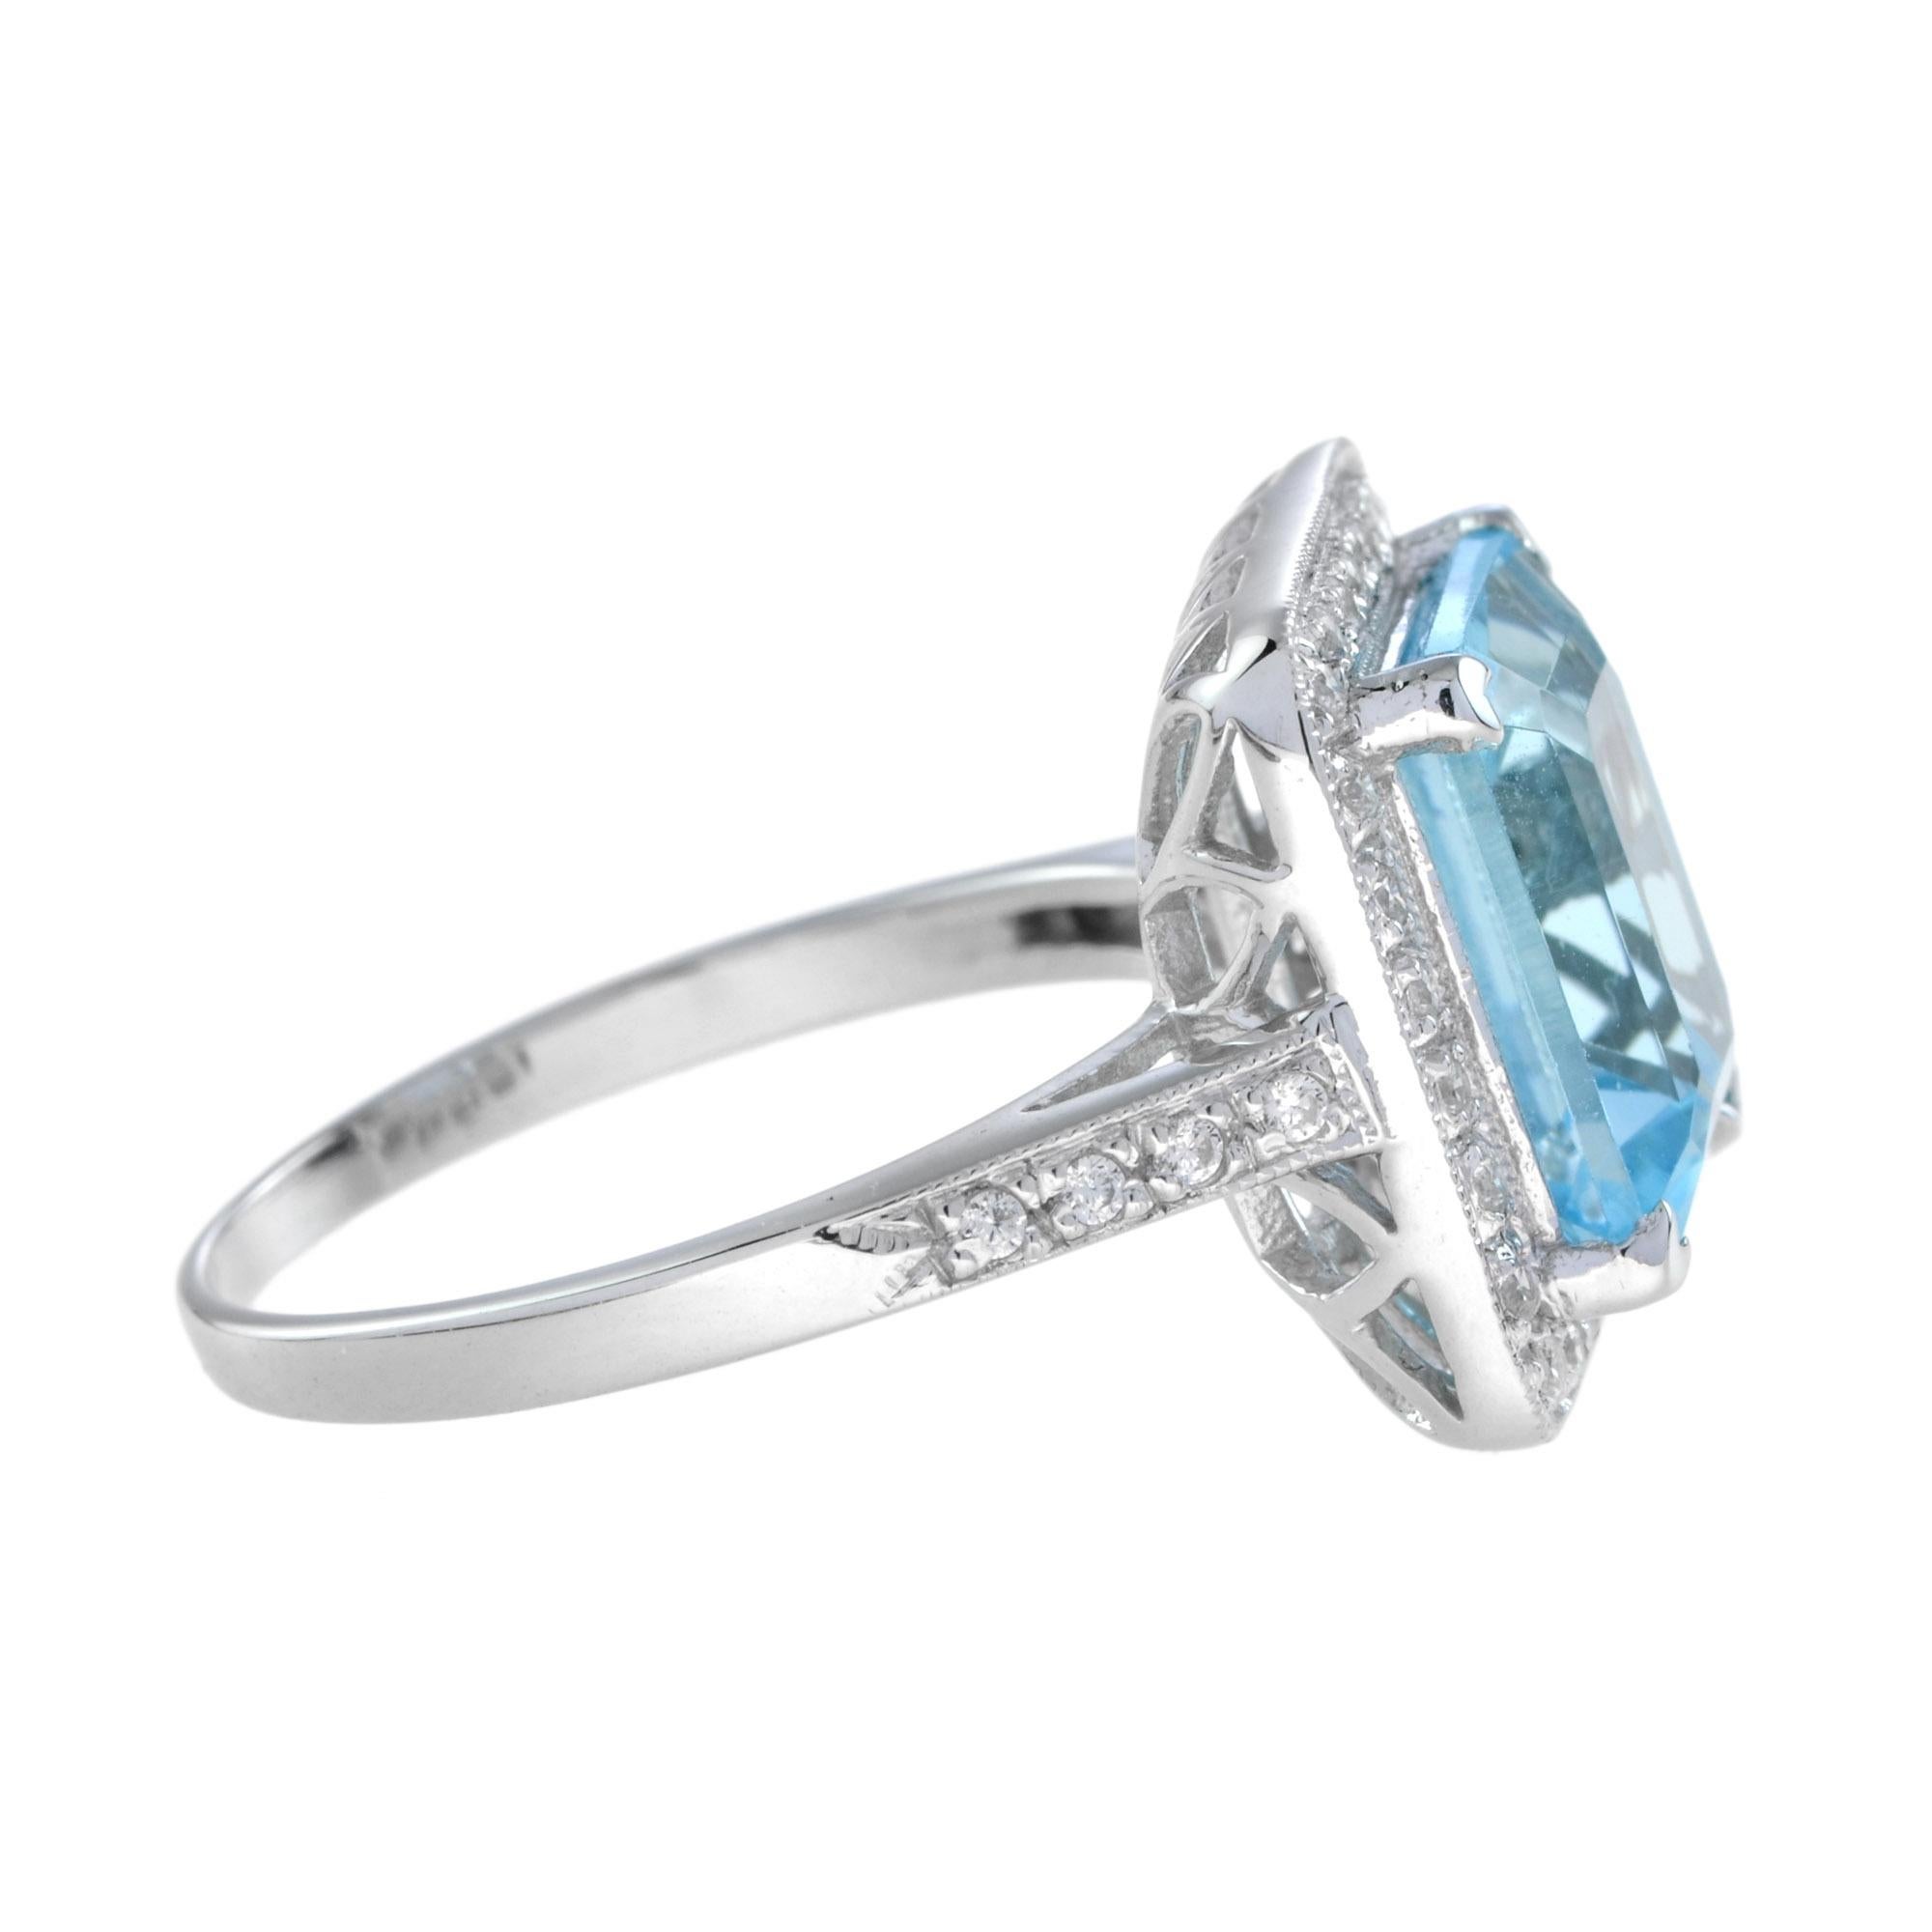 For Sale:  Halona Art Deco Style Emerald Cut Blue Topaz with Diamond Engagement Ring 3